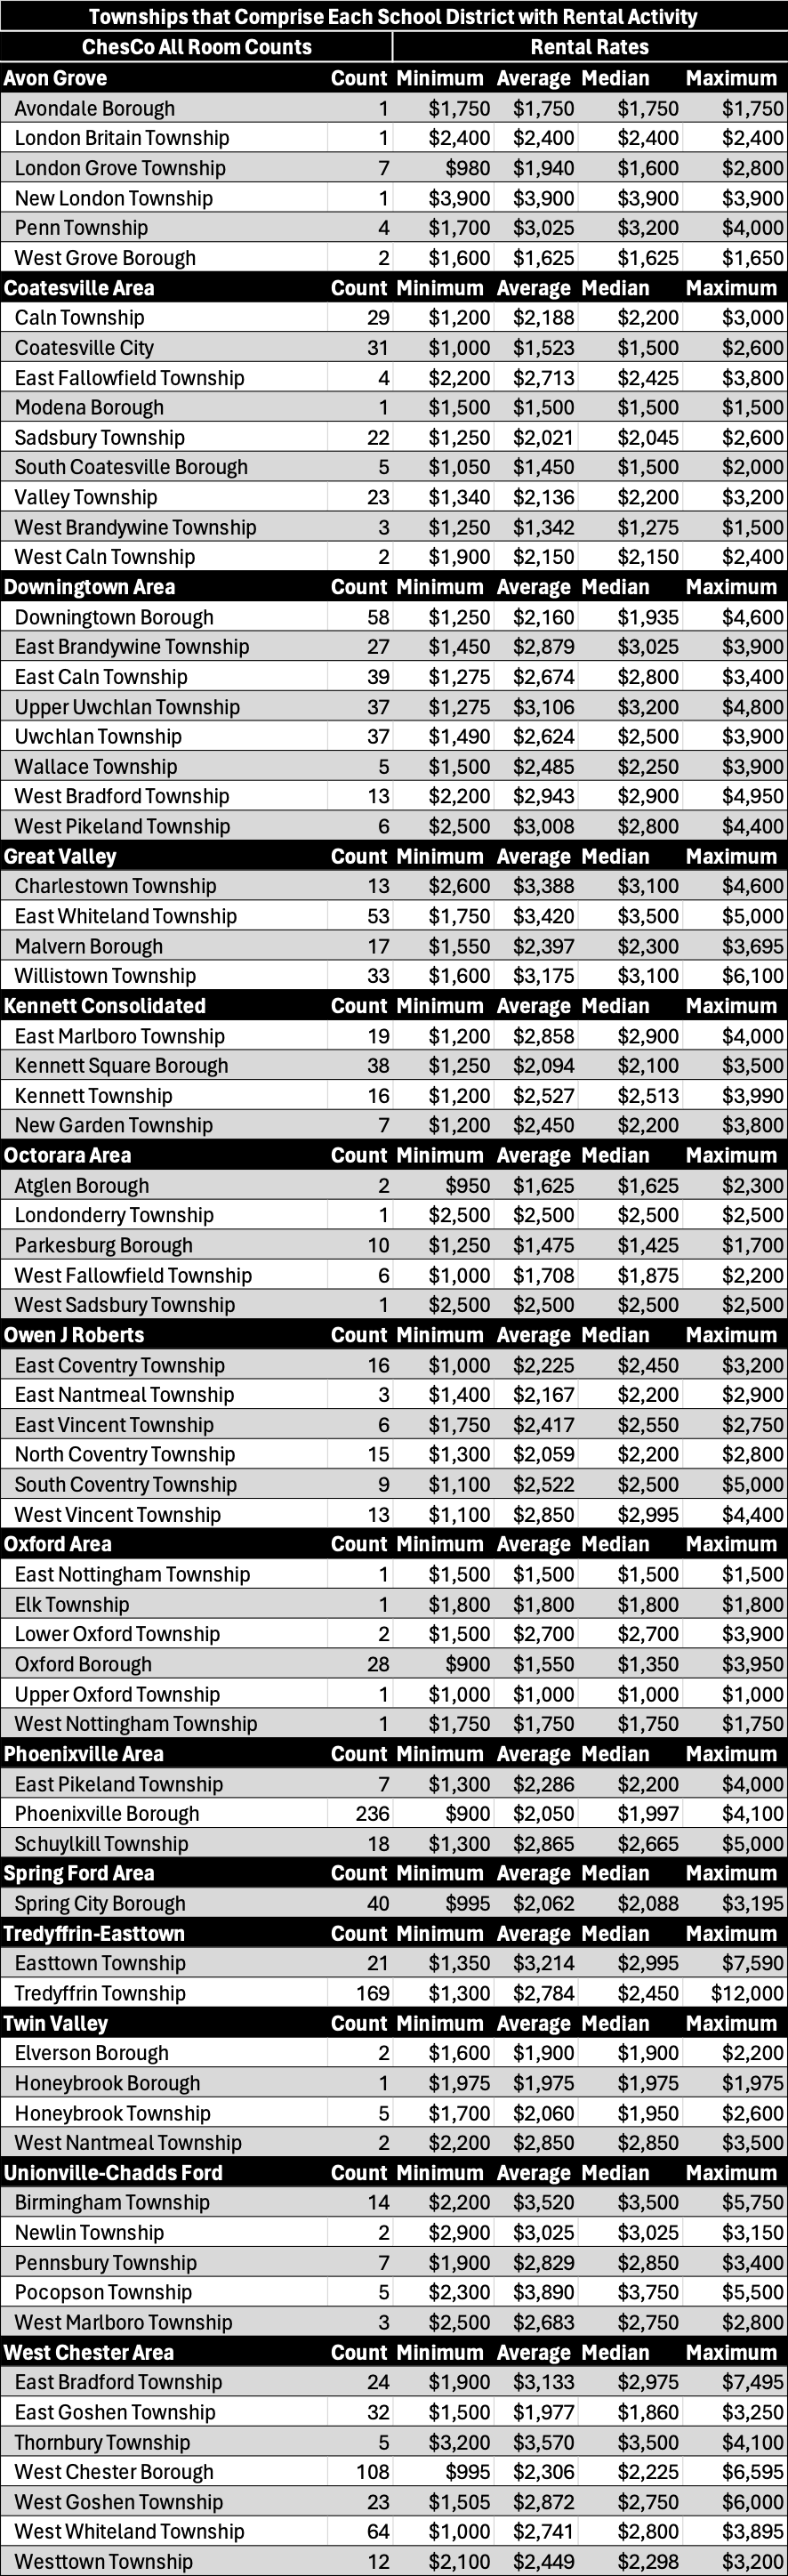 A table of each township within each School District in Chester County, PA for all bedroom counts, which includes the number of transactions and each township's corresponding rent prices displayed as minimum, average and maximum. 